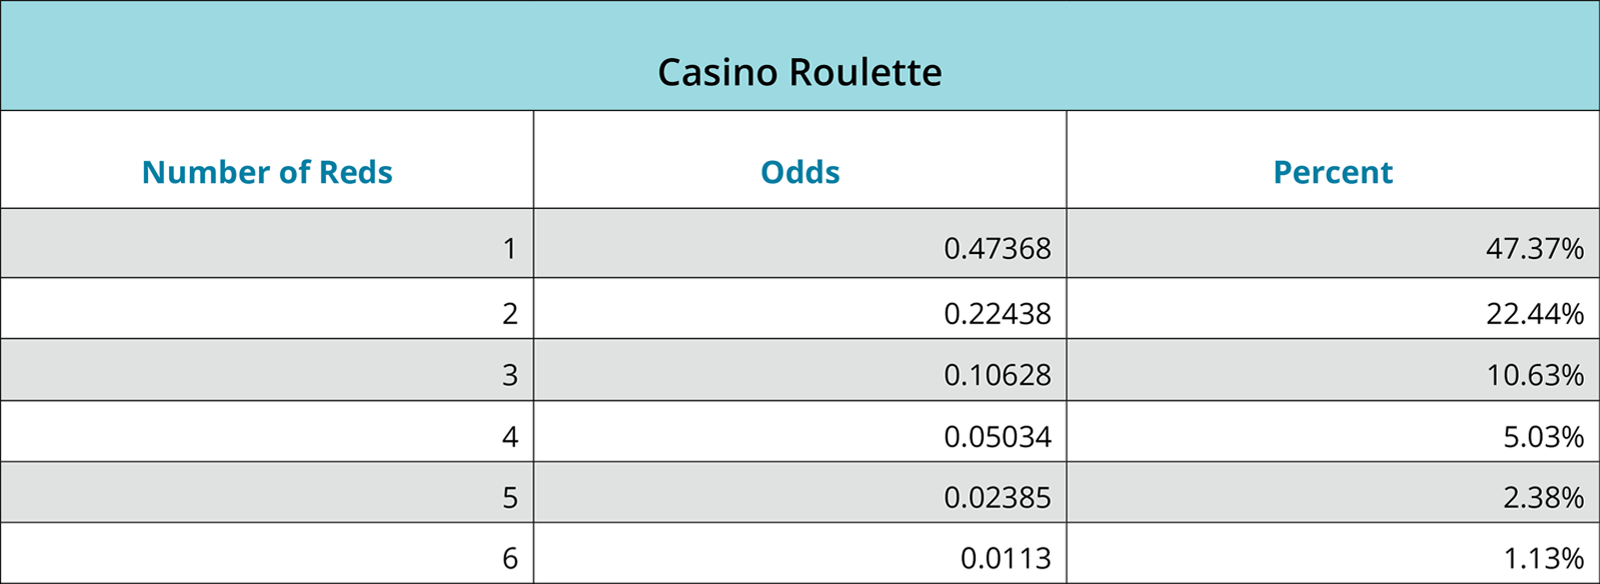 This is a data table of Casino Roulette events with three data column headers: number of reds, odds, and percent. The six observations under the Number of Reds column are 1 2 3 4 5 6. The six observations under the Odds column are 0.473684 0.224377 0.106284 0.050345 0.023848 0.011296. The six observations under the percent column are 47.37 percent 22.44 percent 10.63 percent 5.03 percent 2.38 percent 1.13 percent.